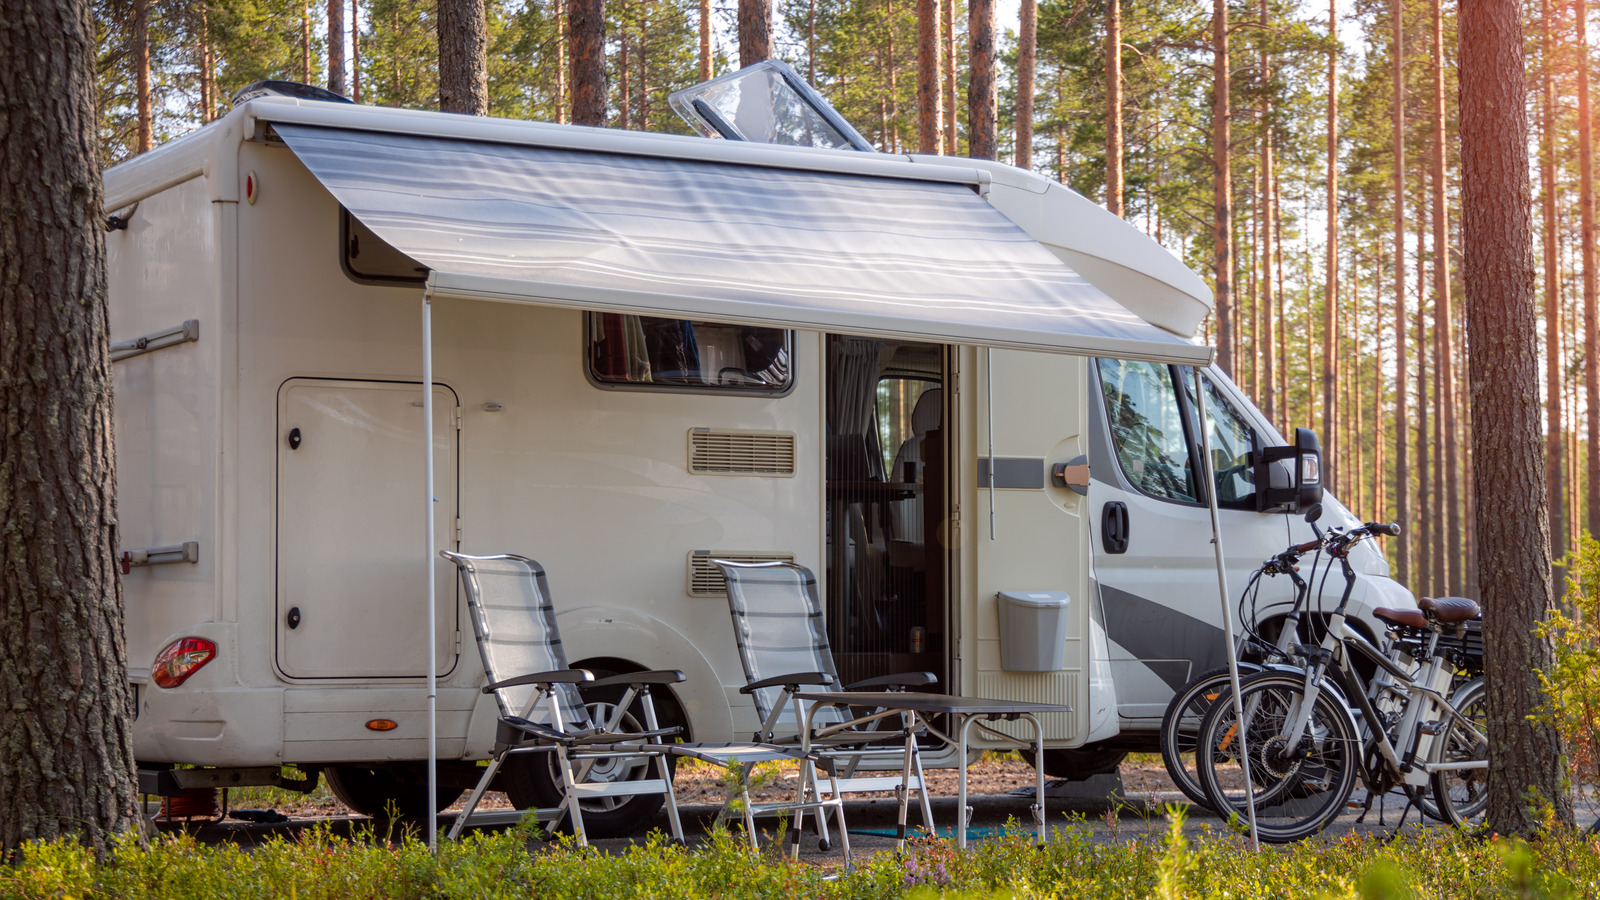 Motorhome Accessories: What Should You Have in Your Motorhome?